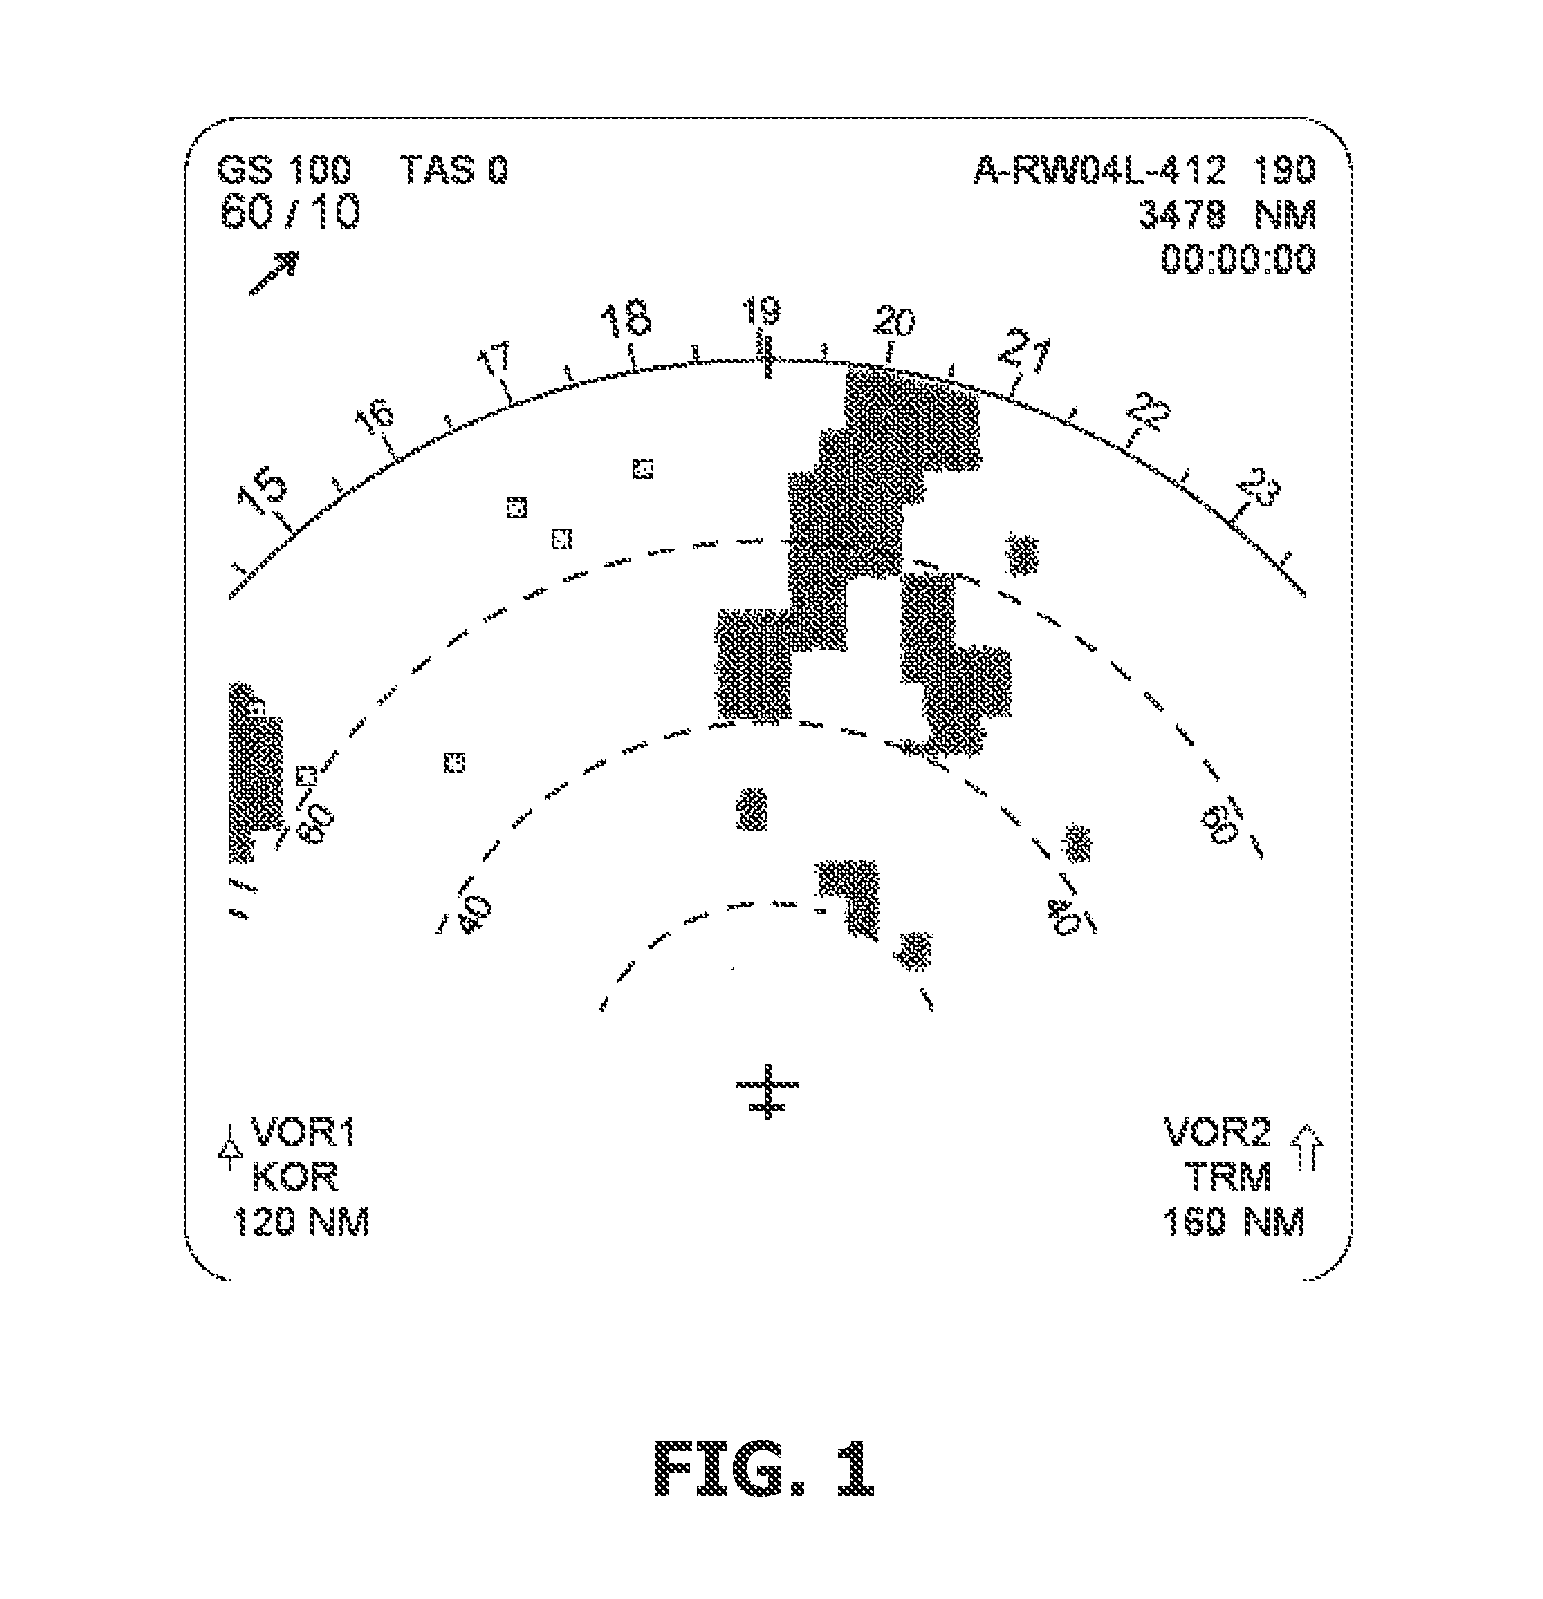 Method and Device for Displaying the Limits of Flight Margins for an Aircraft